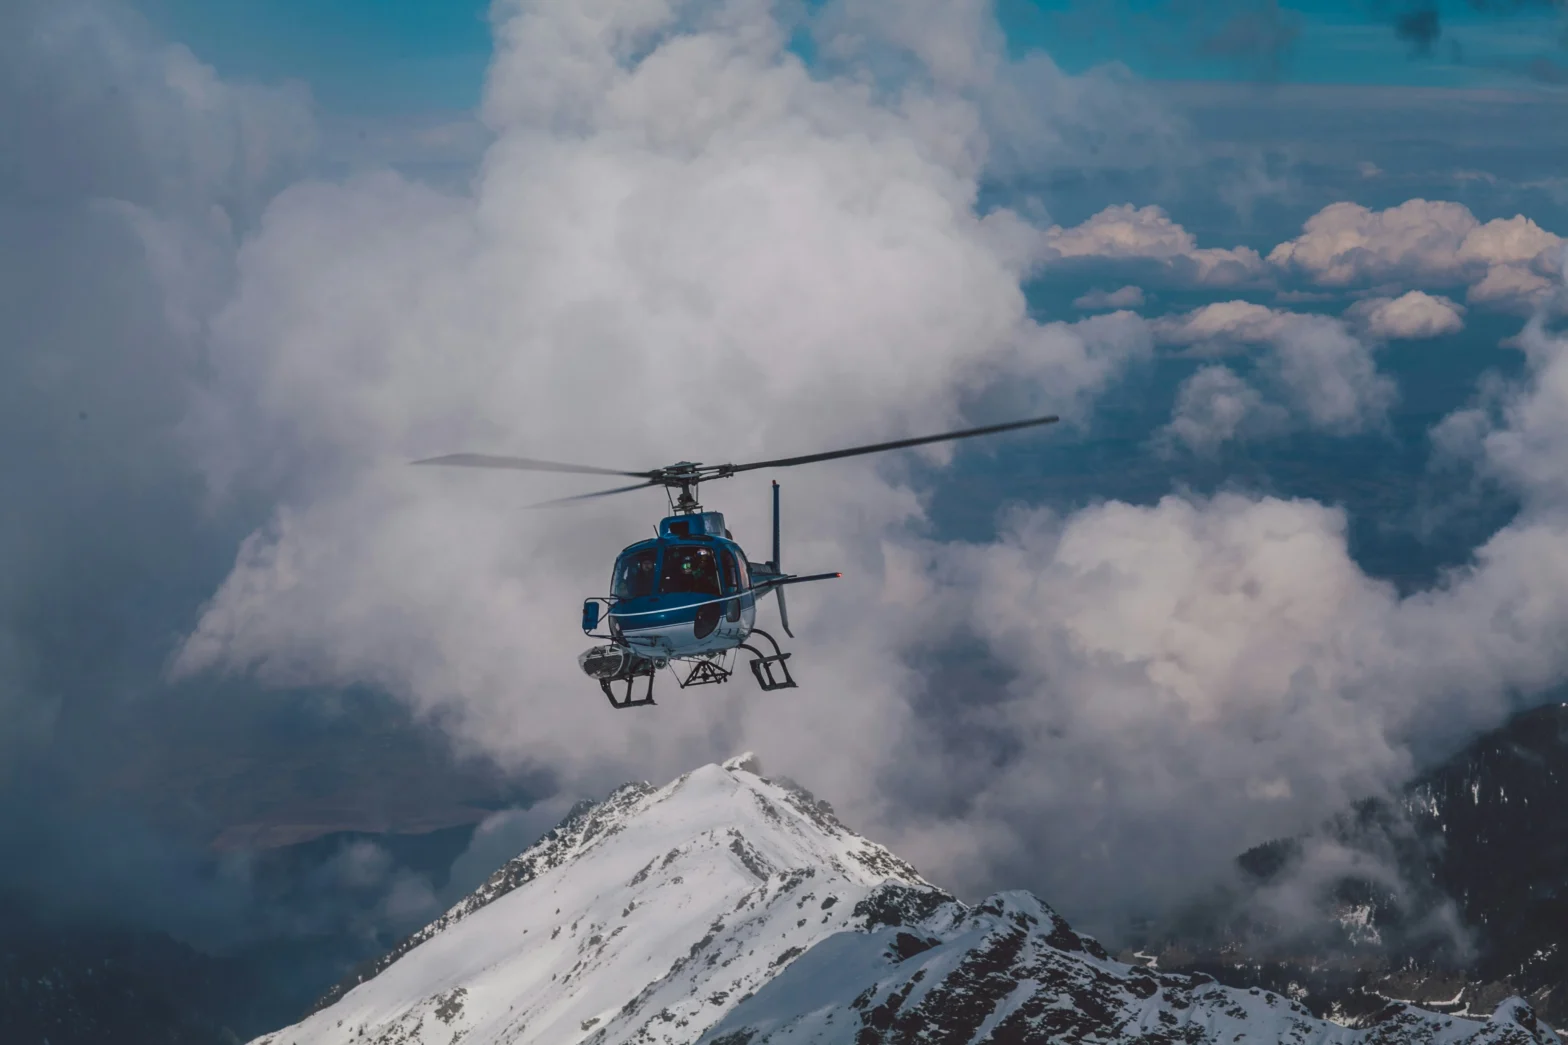 Adventure of Luxury Chardham Yatra Tour Package by Helicopter